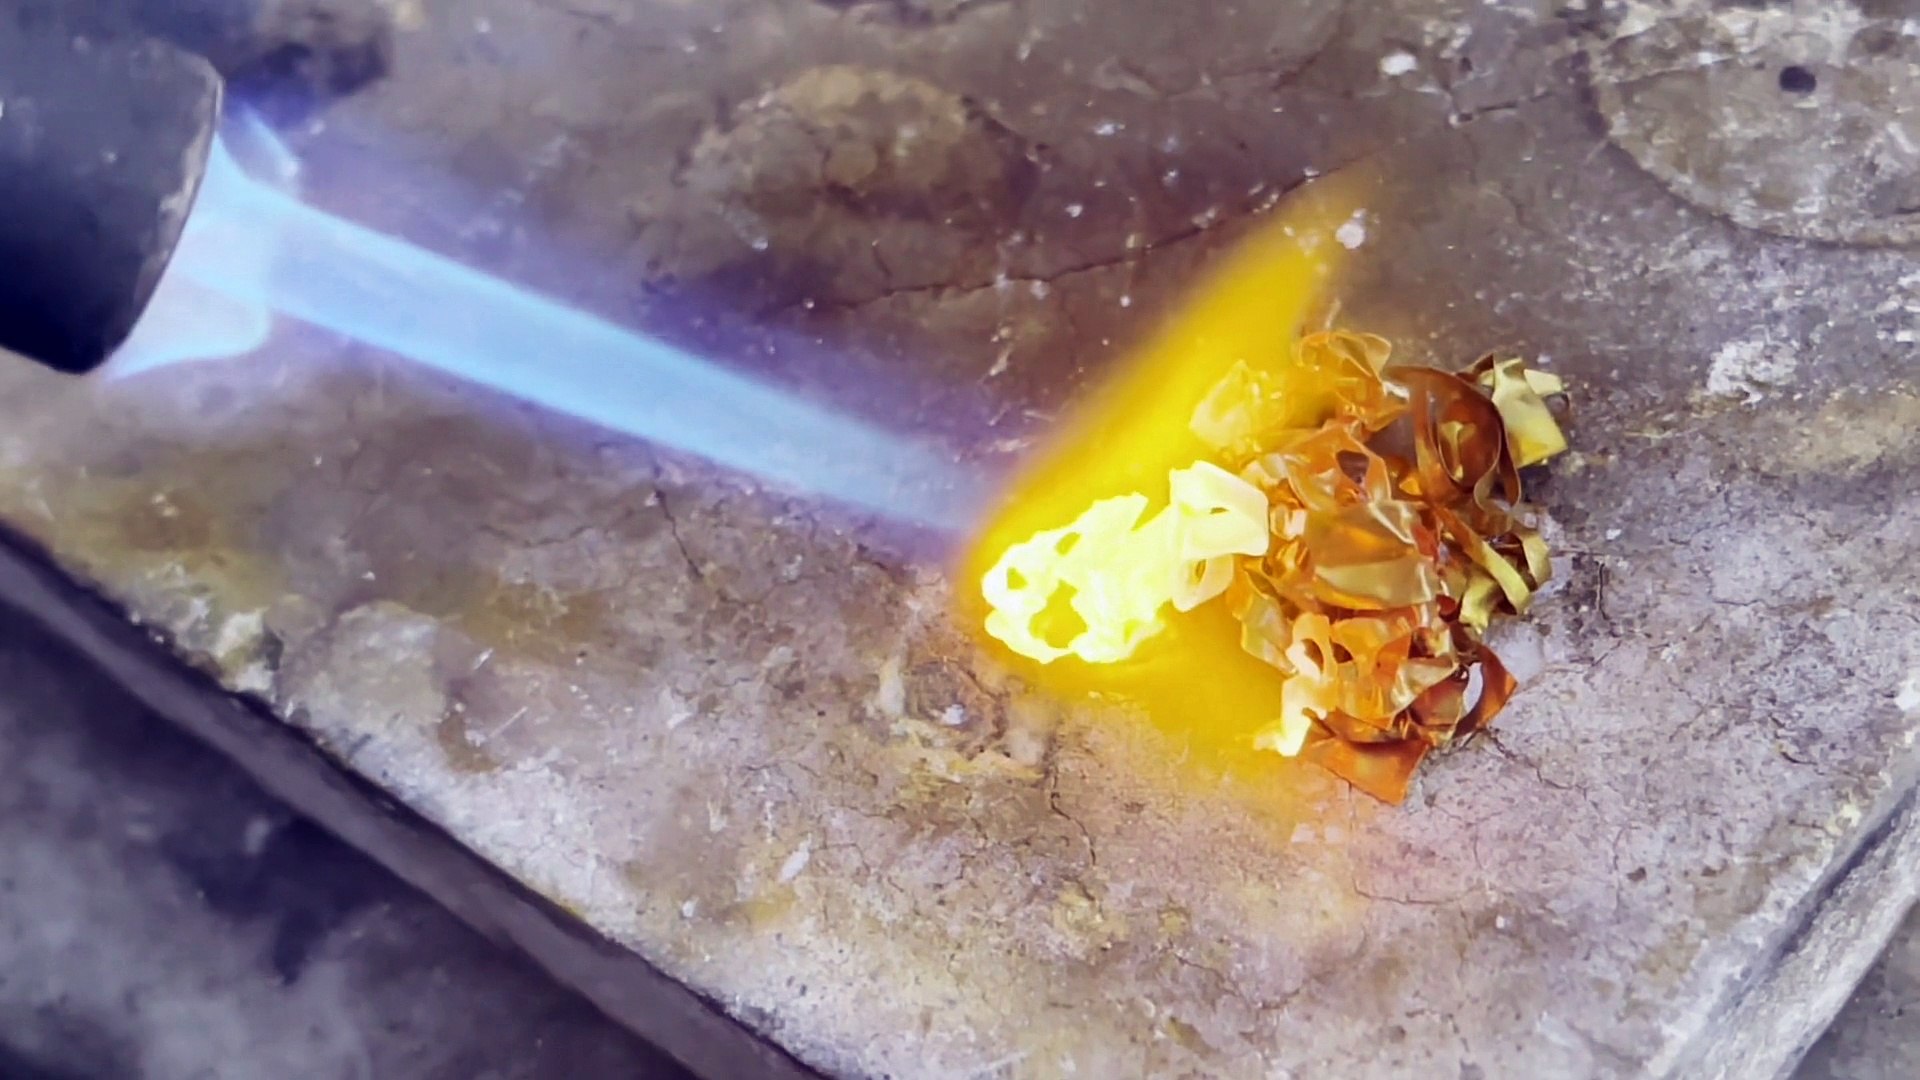 How gold pendent is made